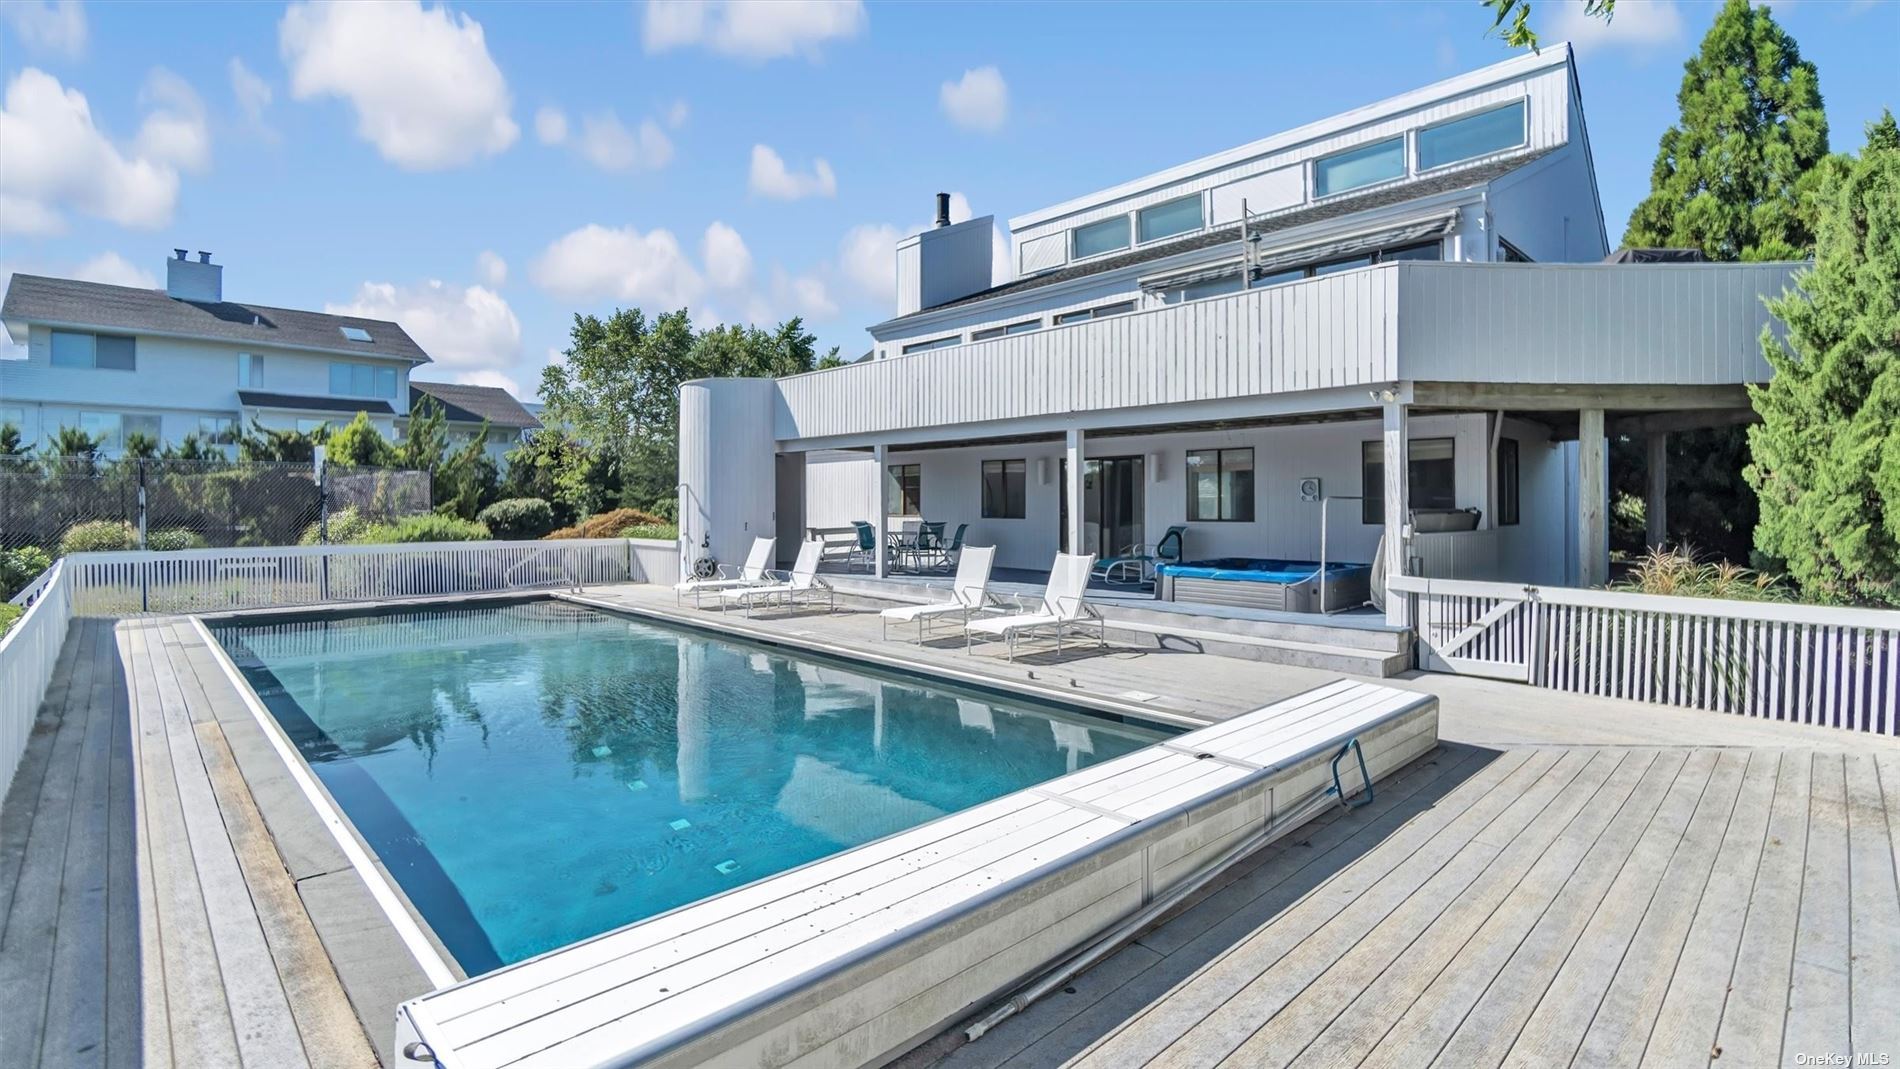 Property for Sale at 3 Stillwaters Lane, Westhampton Beach, Hamptons, NY - Bedrooms: 4 
Bathrooms: 4  - $2,495,000